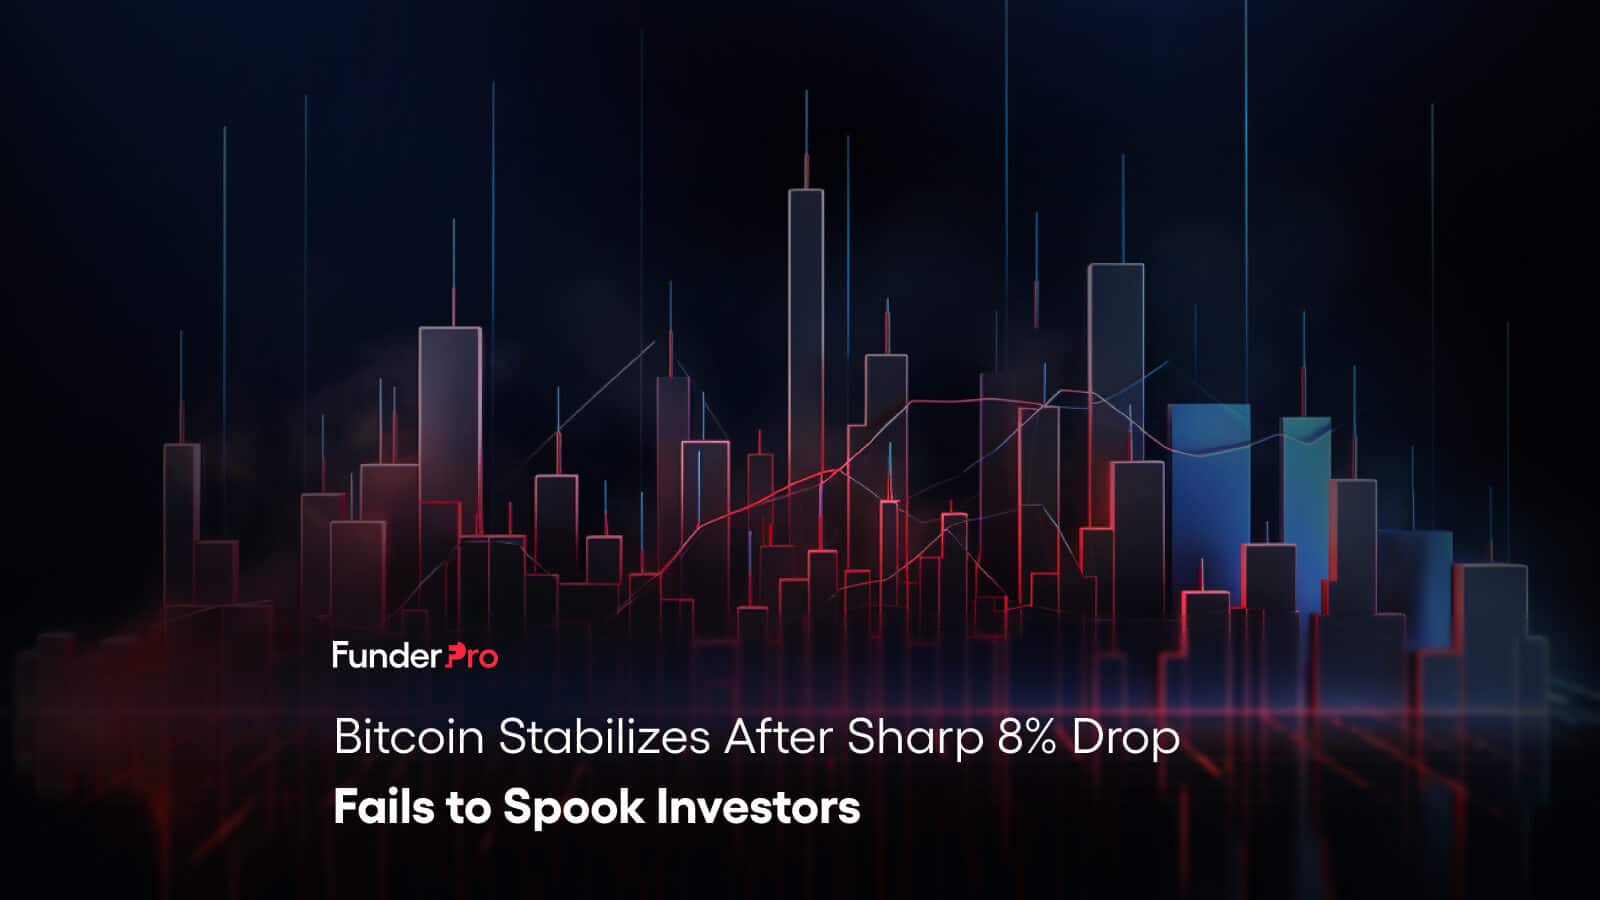 The leading crypto asset bounced off the $41,000 support as traders remained optimistic over the prospects for the first spot BTC ETF.